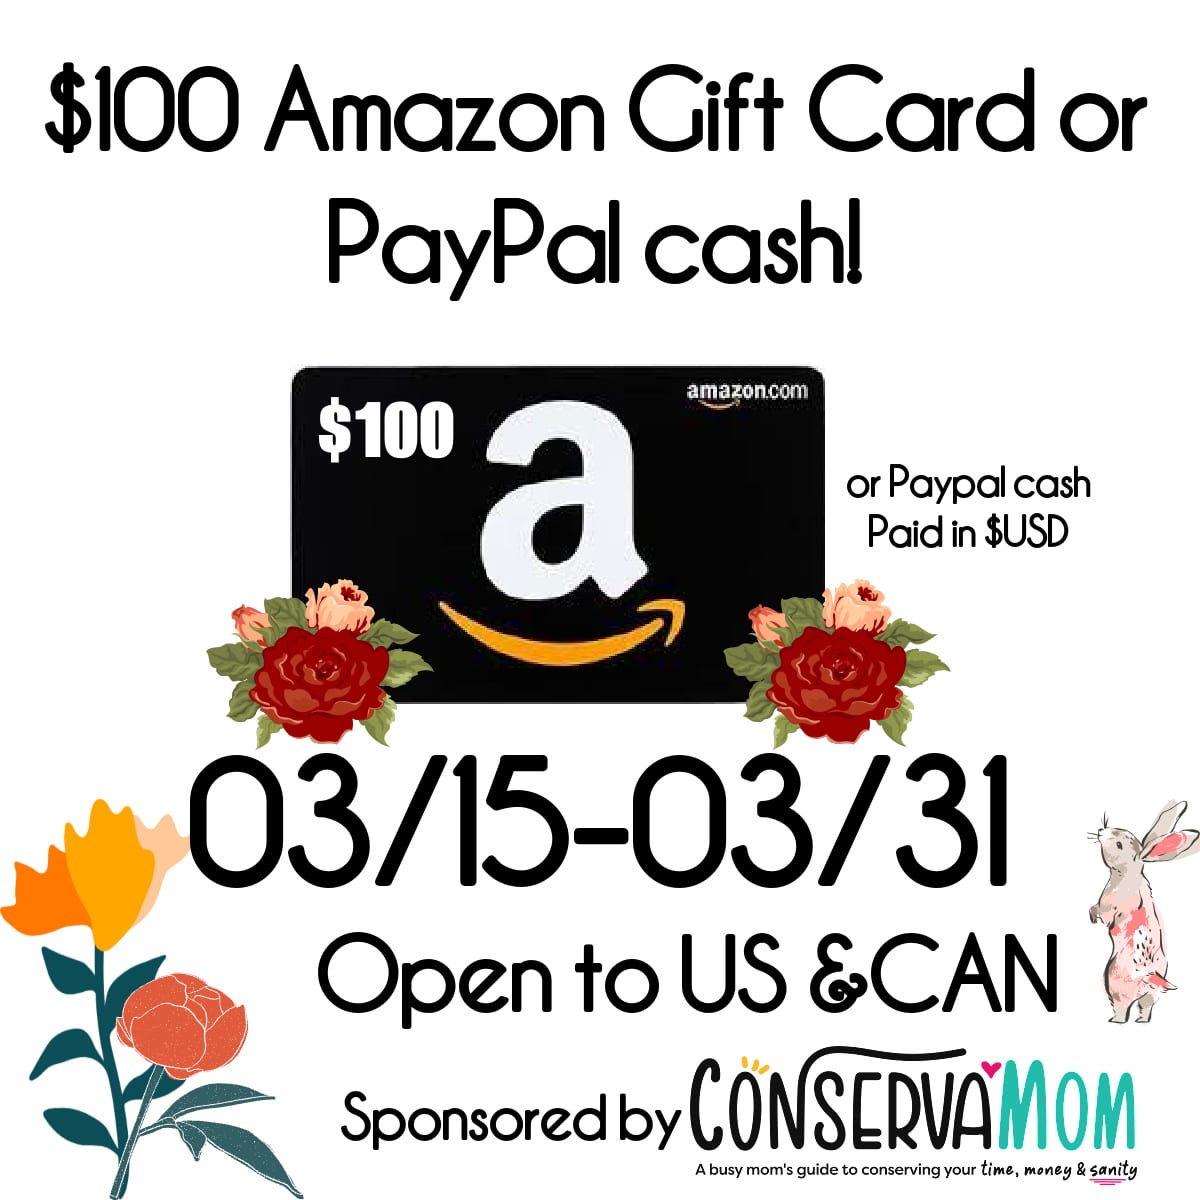 Enter to Win a $100 Amazon Gift Card or Paypal Cash